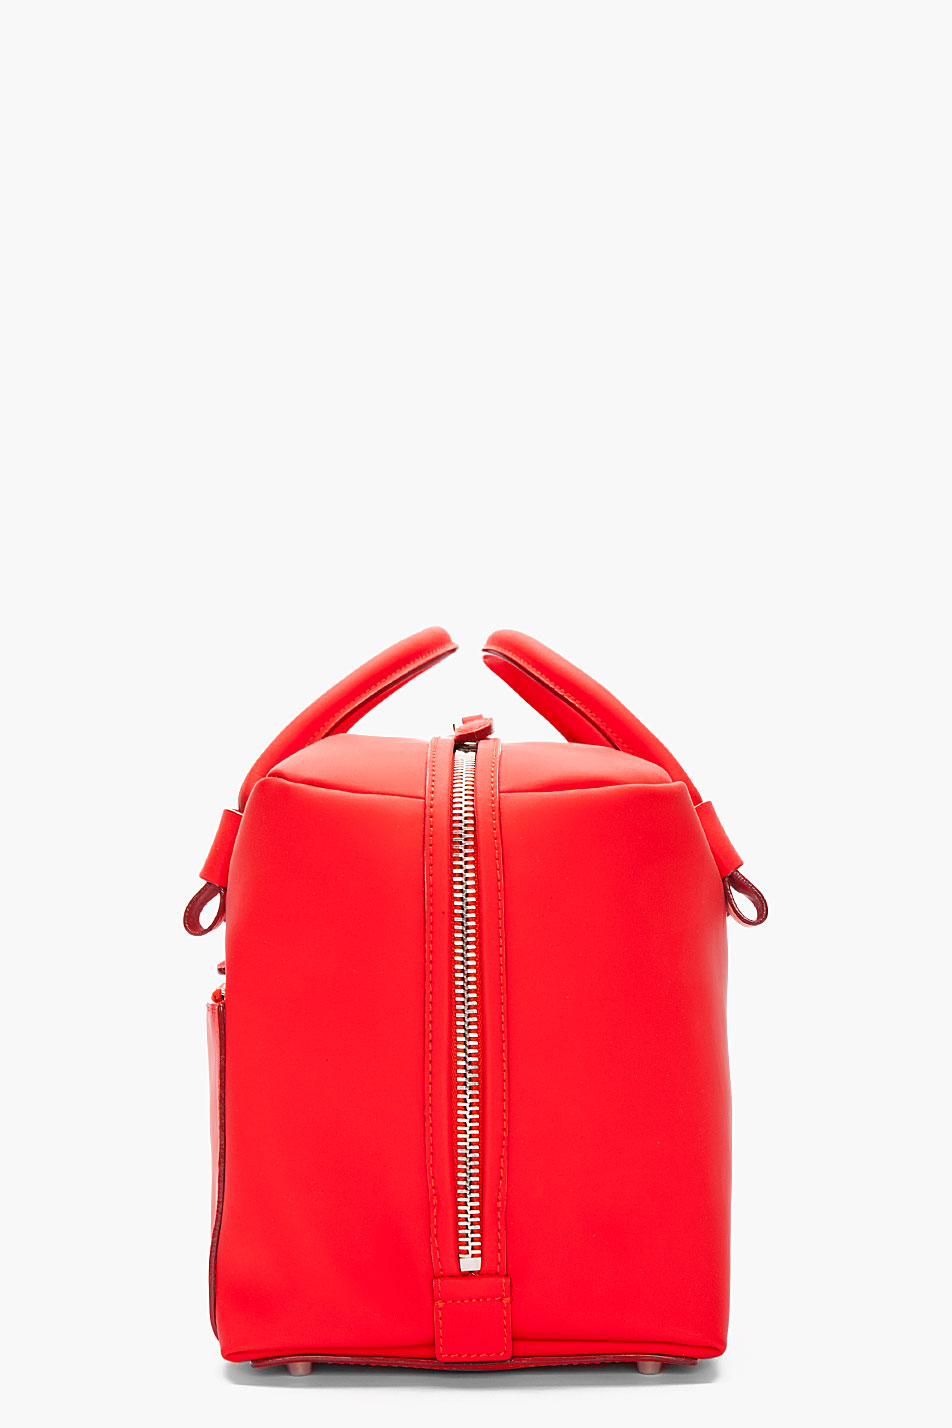 Lyst - Marc jacobs Red Small Antonia Bag in Red